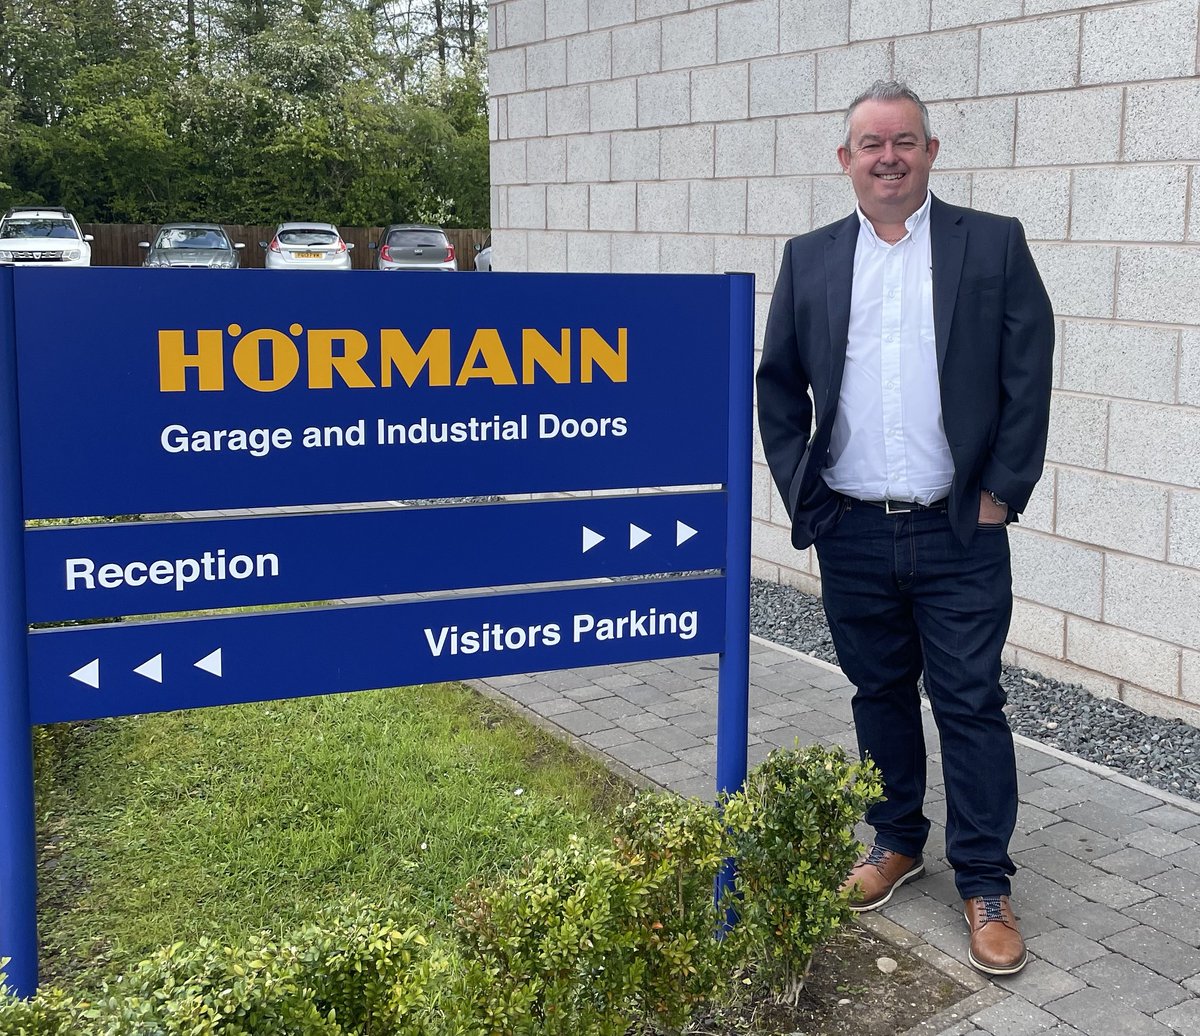 FBS Hörmann has appointed John Aitken as their new MD. Having been with @fen_bayservices for 16 years, John brings extensive #knowledge & #experience to his new role. ➡️fmuk-online.co.uk/features/5671-… #facman #FacilitiesManagement #Loadingbay #doors #PerimeterProtection #security